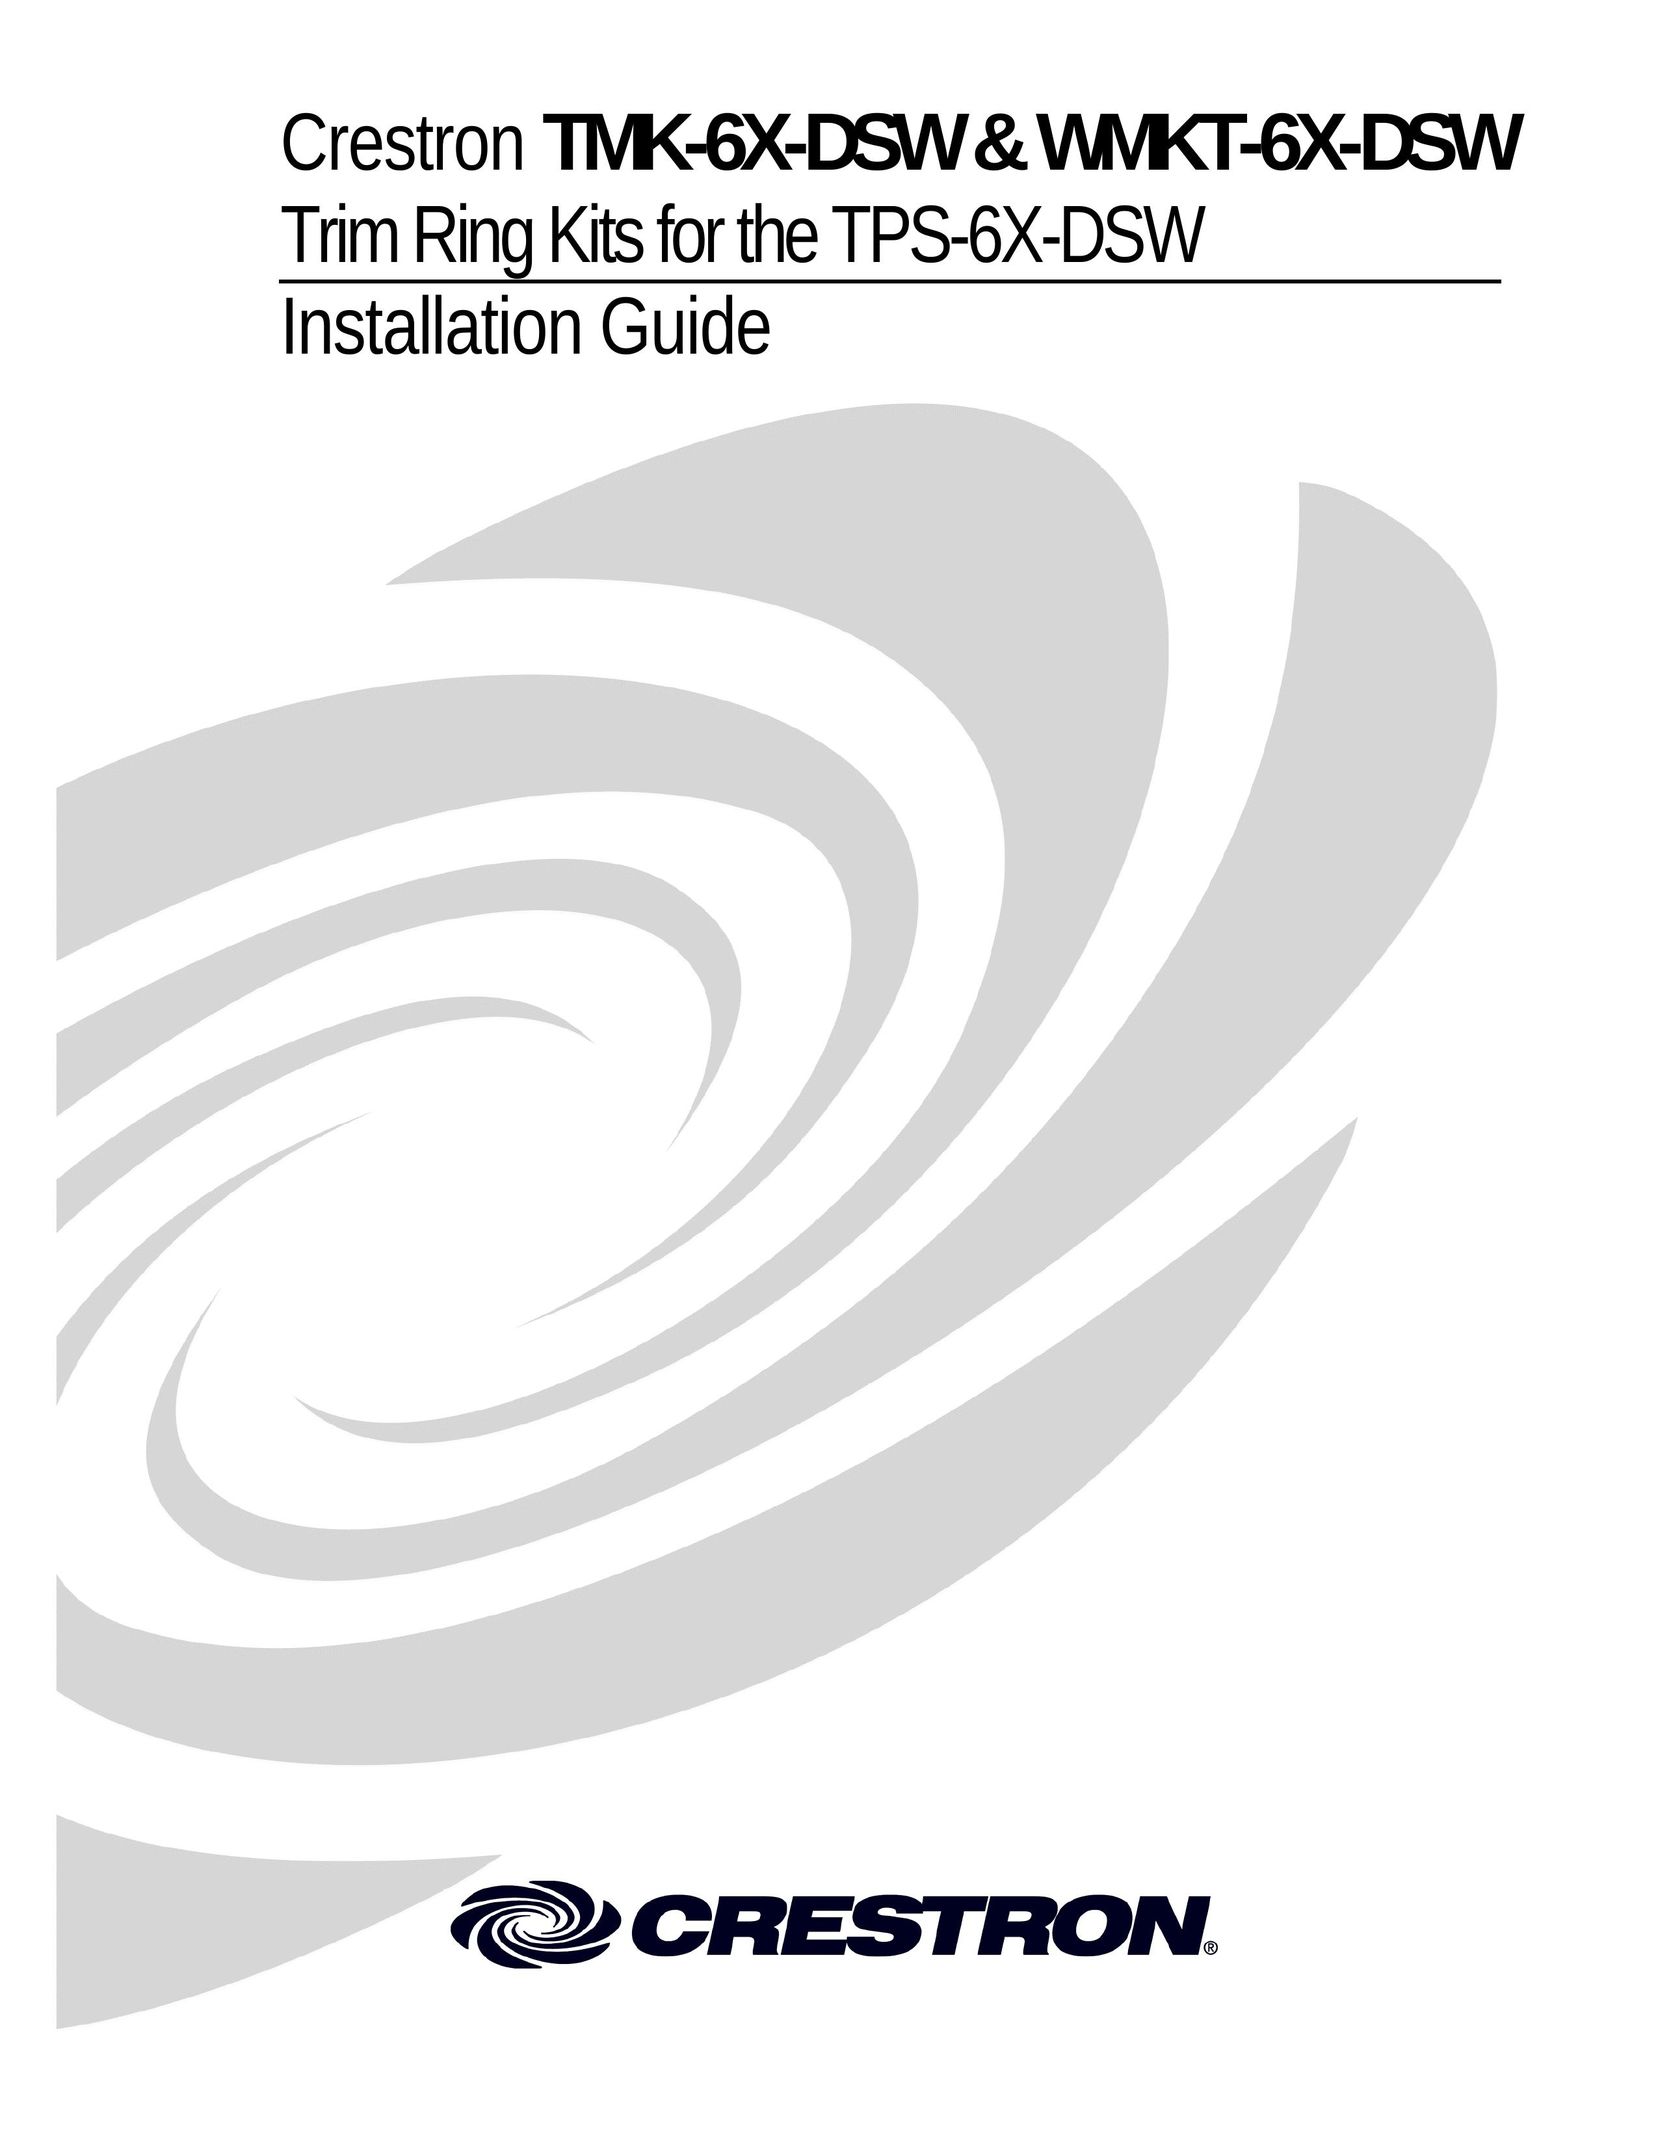 Crestron electronic TMK-6X-DSW MP3 Docking Station User Manual (Page 1)